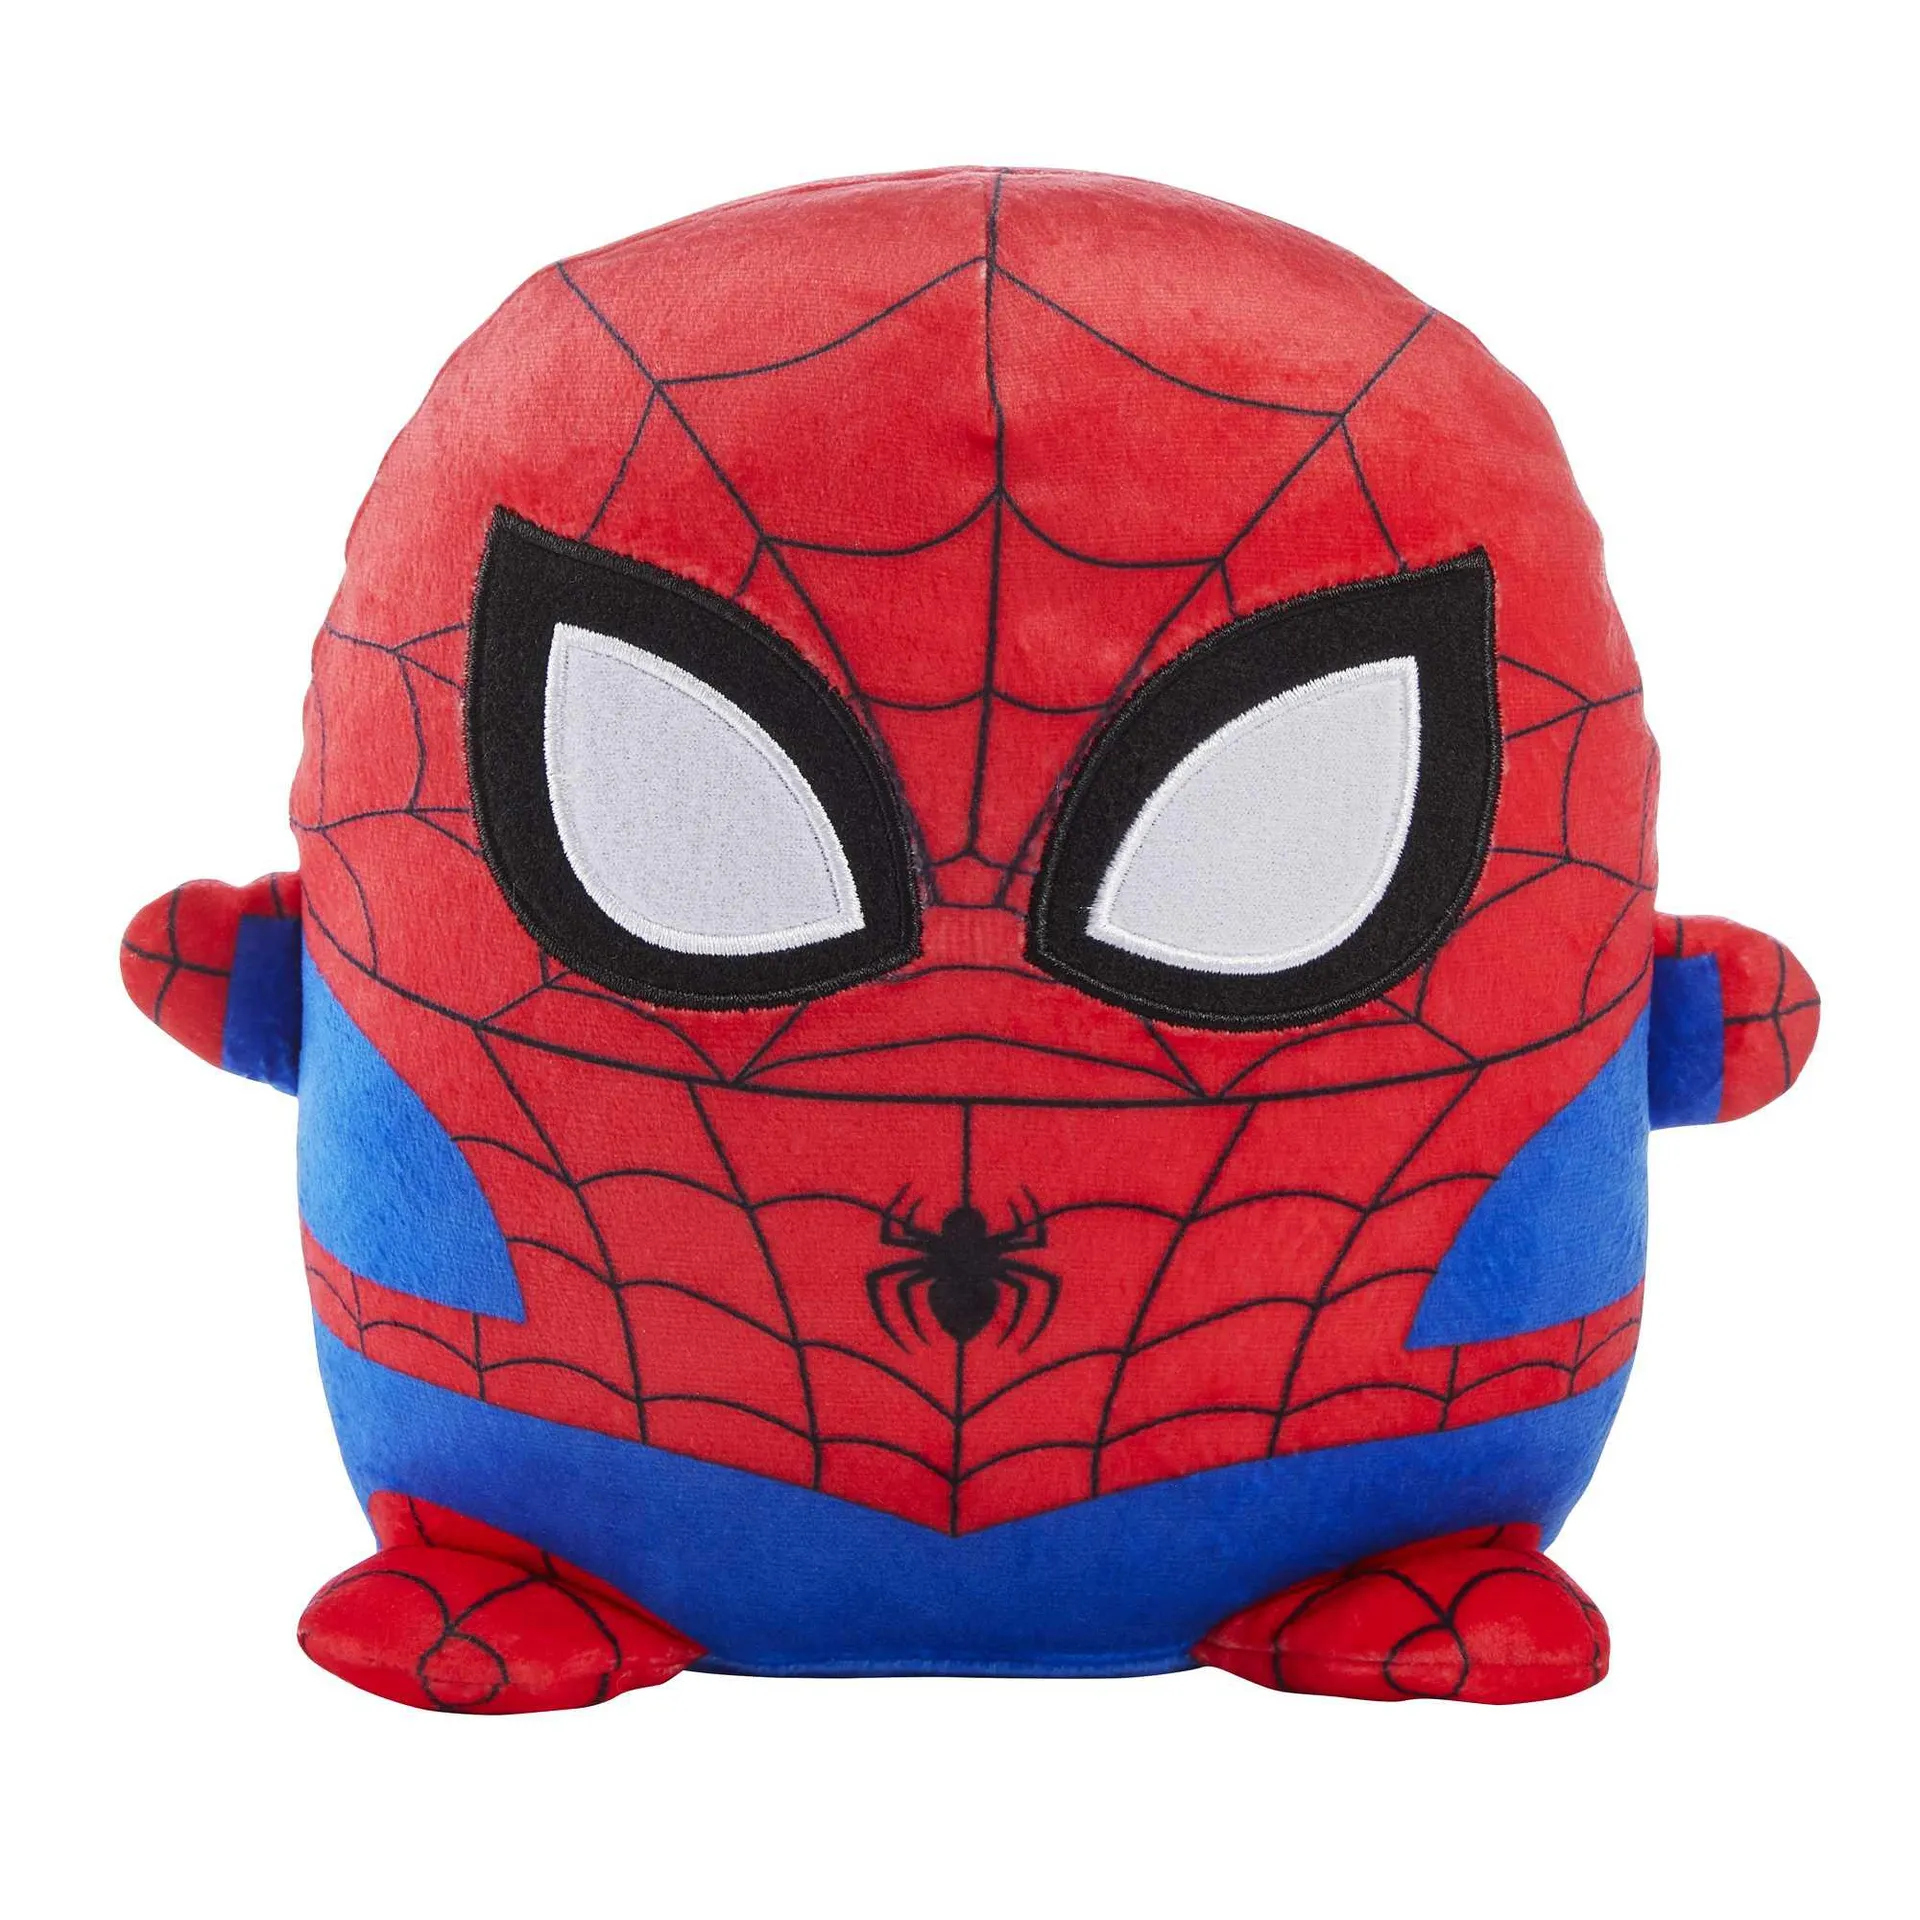 Marvel Cuutopia Plush Spider-Man, 10-In Soft Rounded Pillow Doll, Collectible Superhero Stuffed Animal